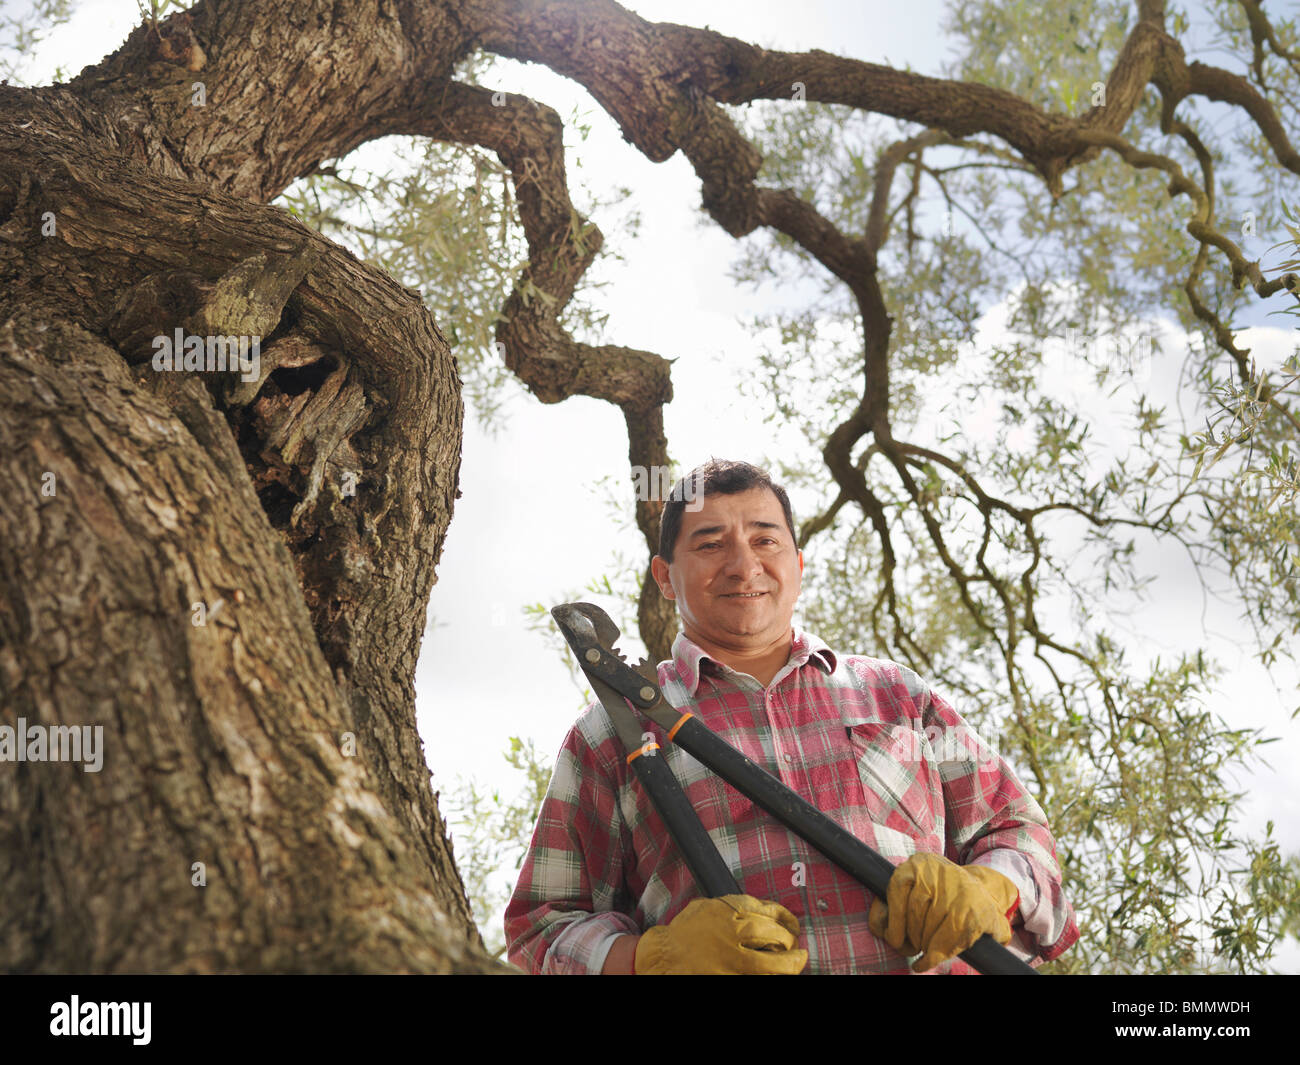 Man holding secateur next to olive tree Stock Photo